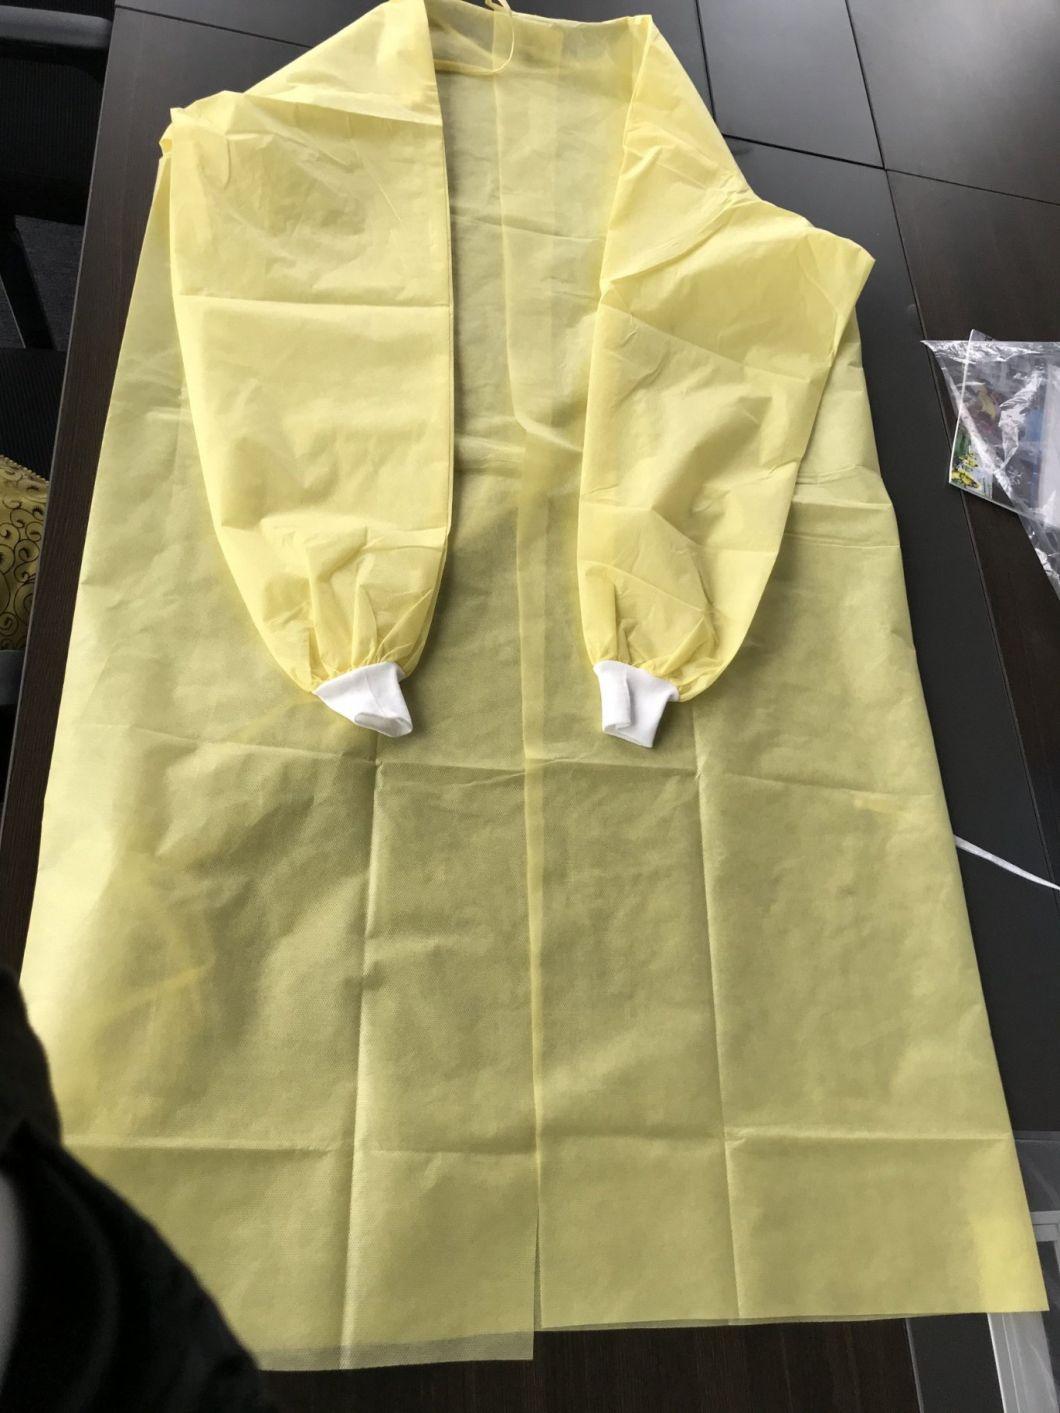 PP Nonwoven Fabric Disposable Isolation Gown Protective Clothing Gown